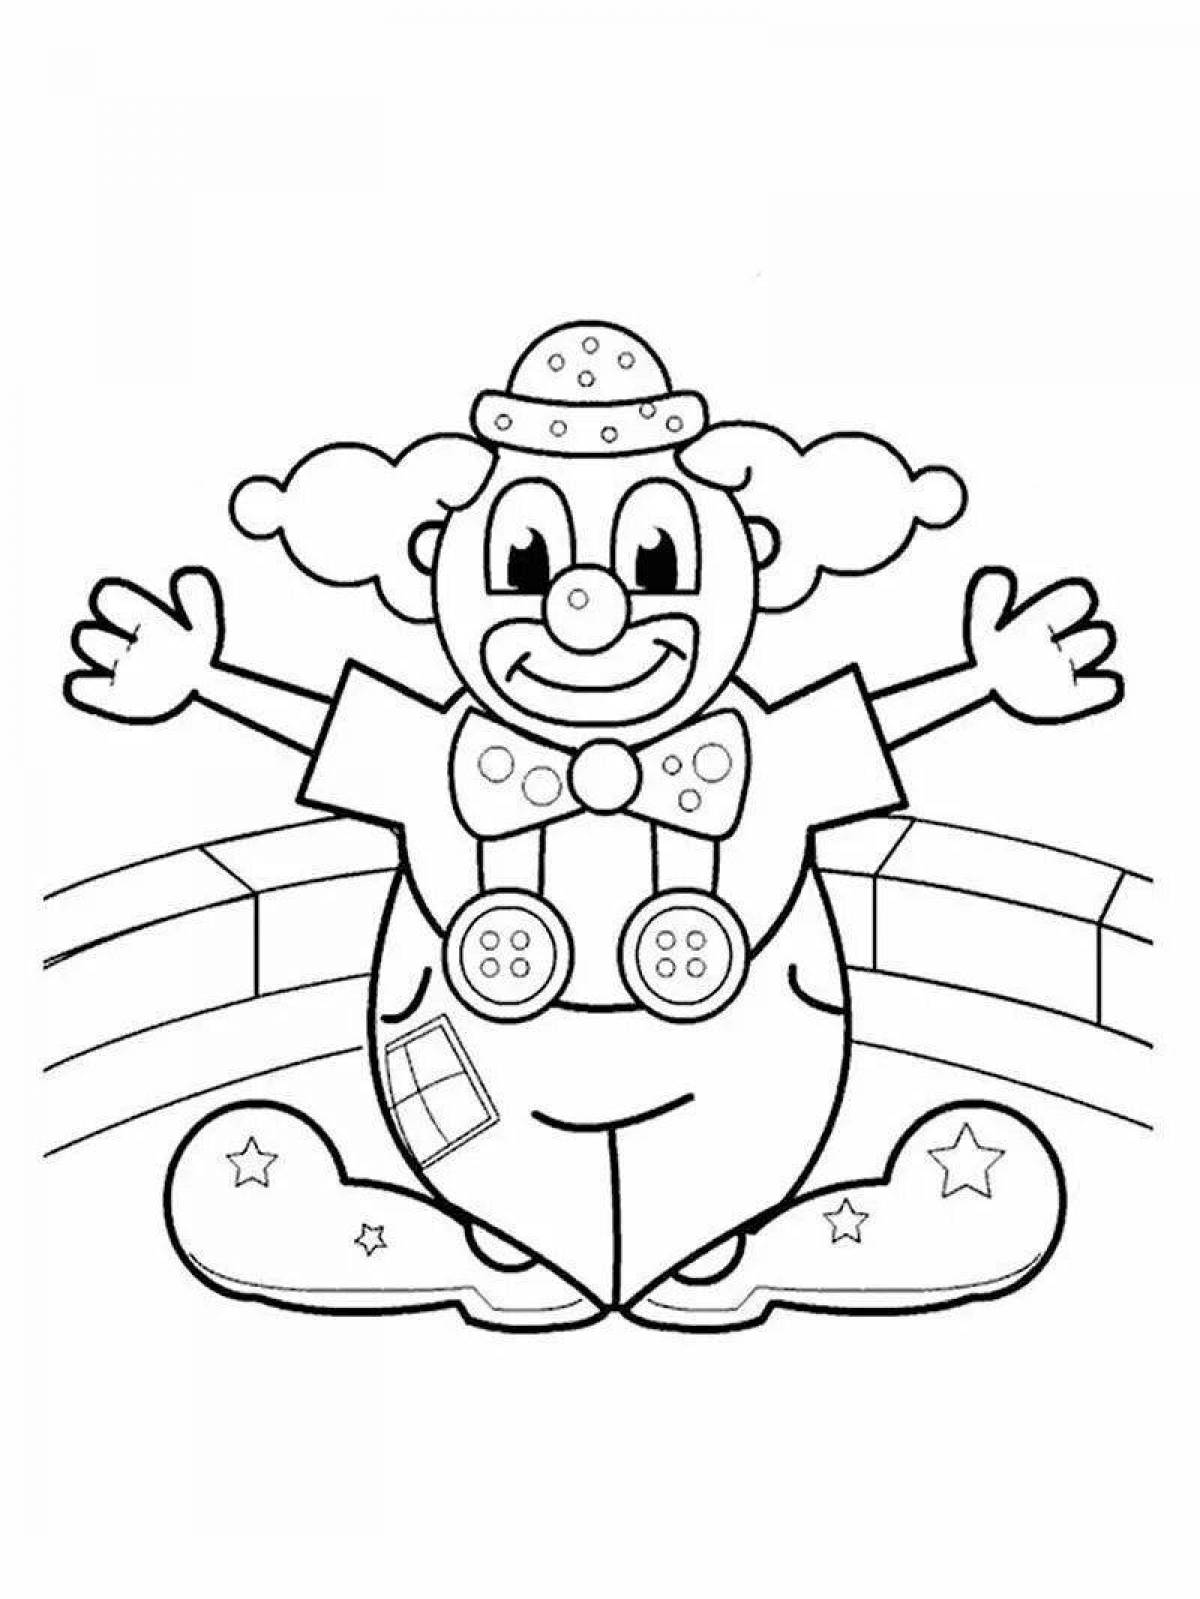 Exciting coloring book visiting a clown